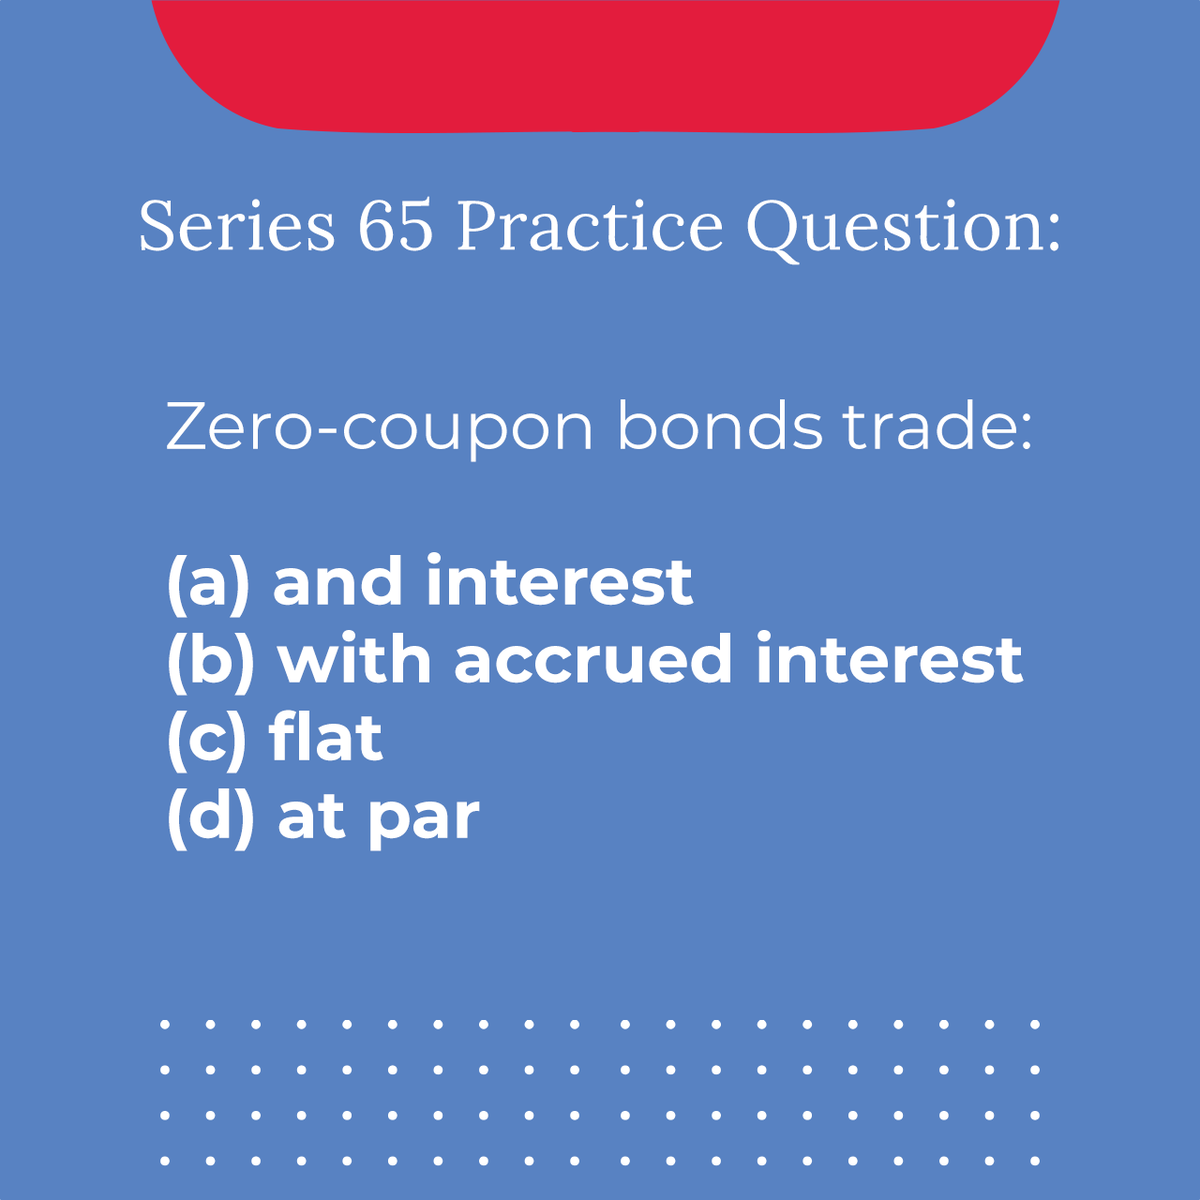 The Series 65 — Uniform Investment Adviser Law Exam — covers laws, ethics, regulations, and various other topics important to the role of a financial advisor. Test your knowledge with this sample question!

Learn more here: bit.ly/3wFhrPm

#Series65 #ExamPrep